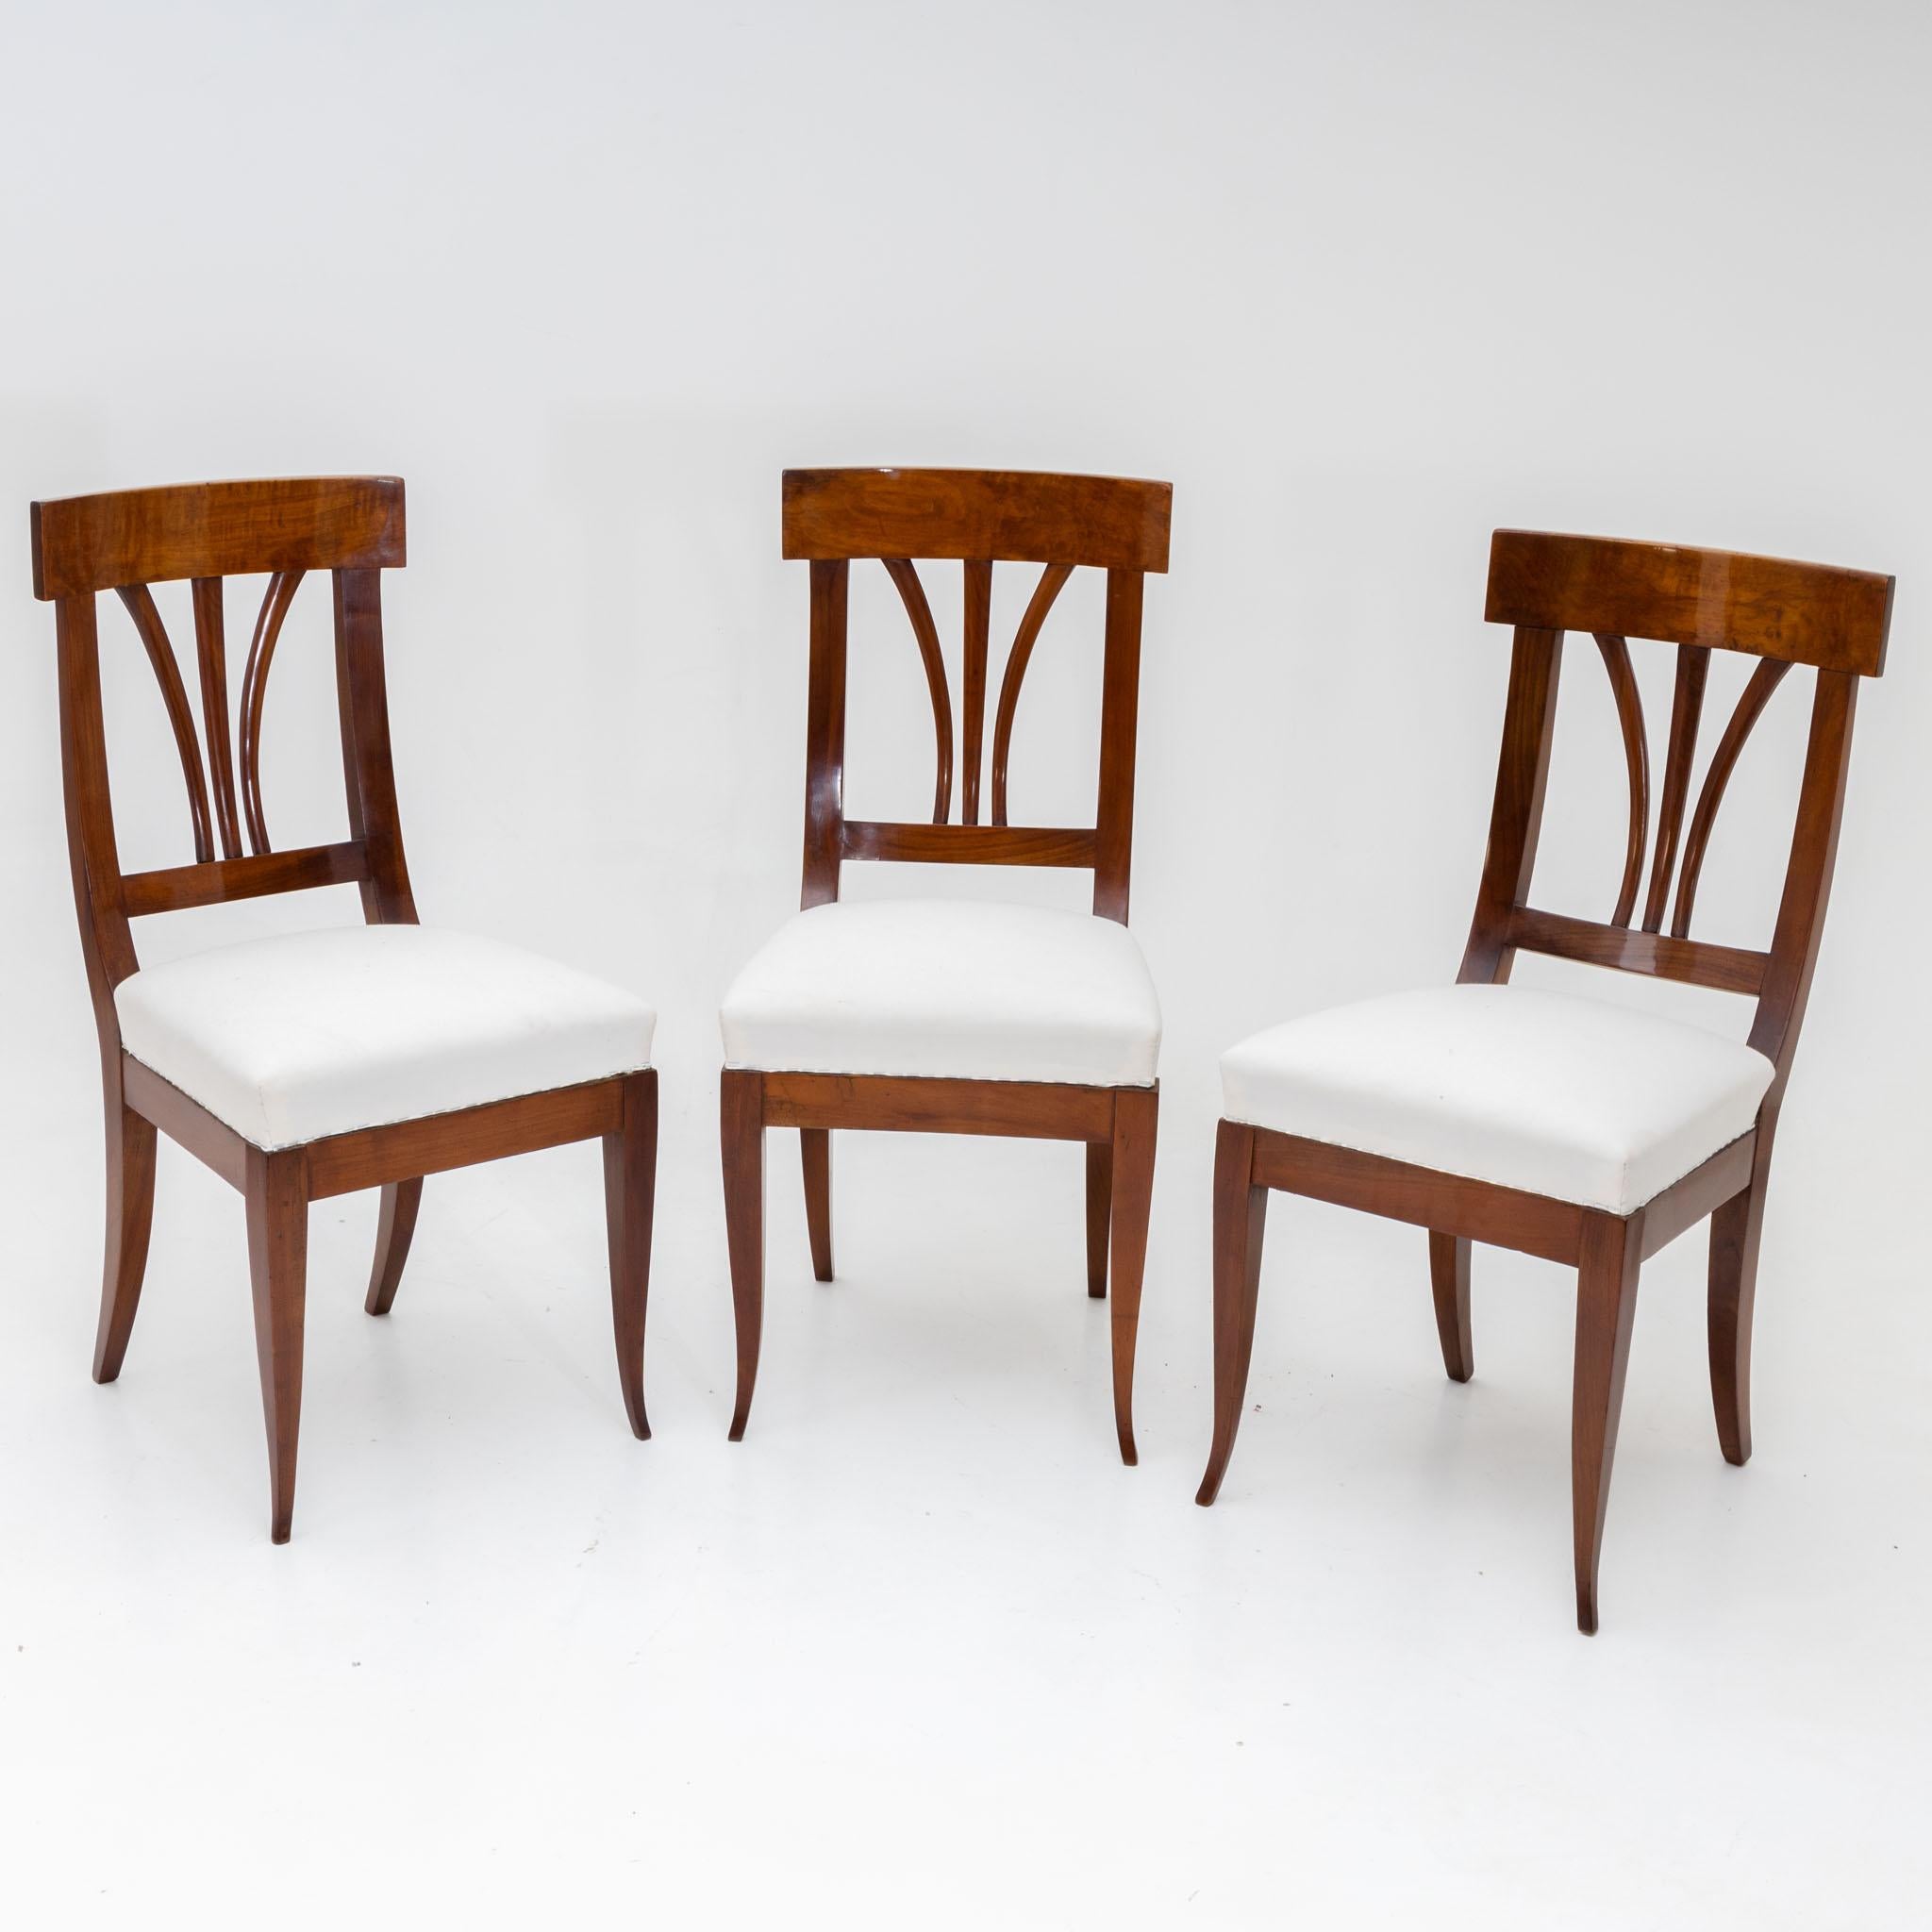 Set of three Biedermeier chairs in walnut with white upholstered seats and backs with three struts. The chairs stand on flared legs and have been newly upholstered and hand polished.